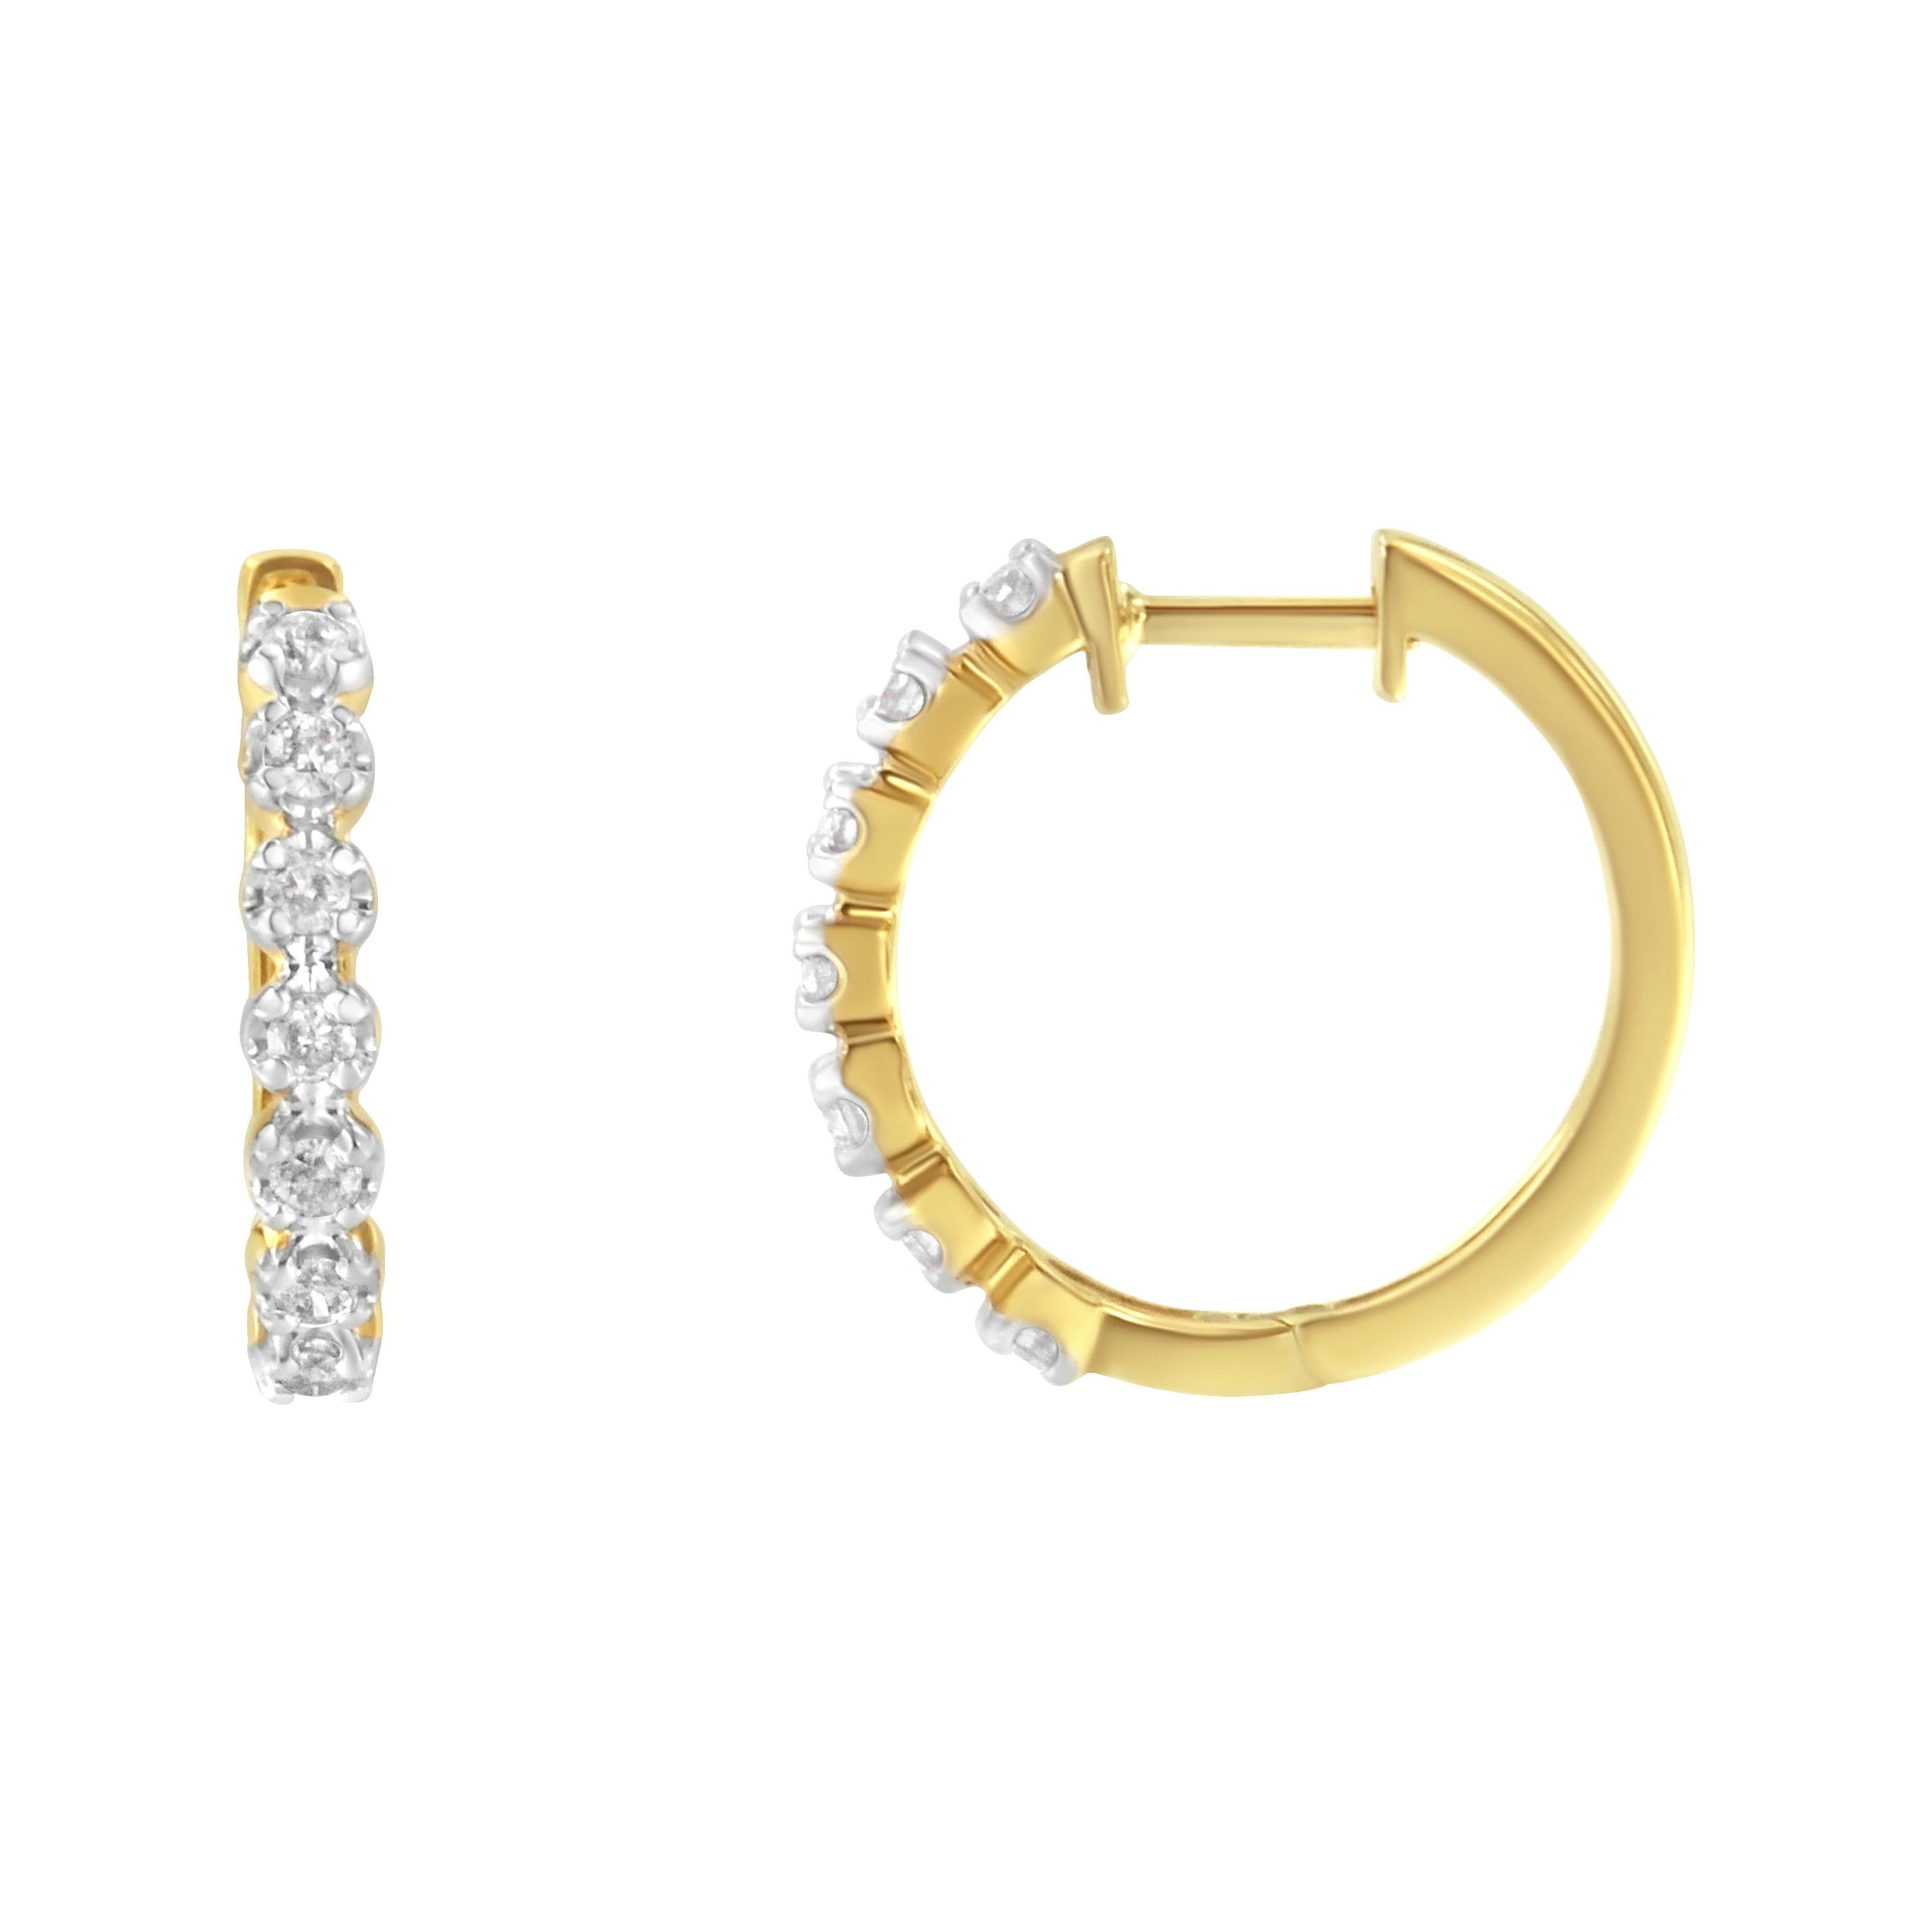 Fashioned in stunning 10k yellow gold, these beautiful huggy hoop earrings feature 1/2ct of brilliant round cut diamonds in a prong setting that delicately flow half way around the outside of the hoop. A classic piece you can wear everyday.

'Video